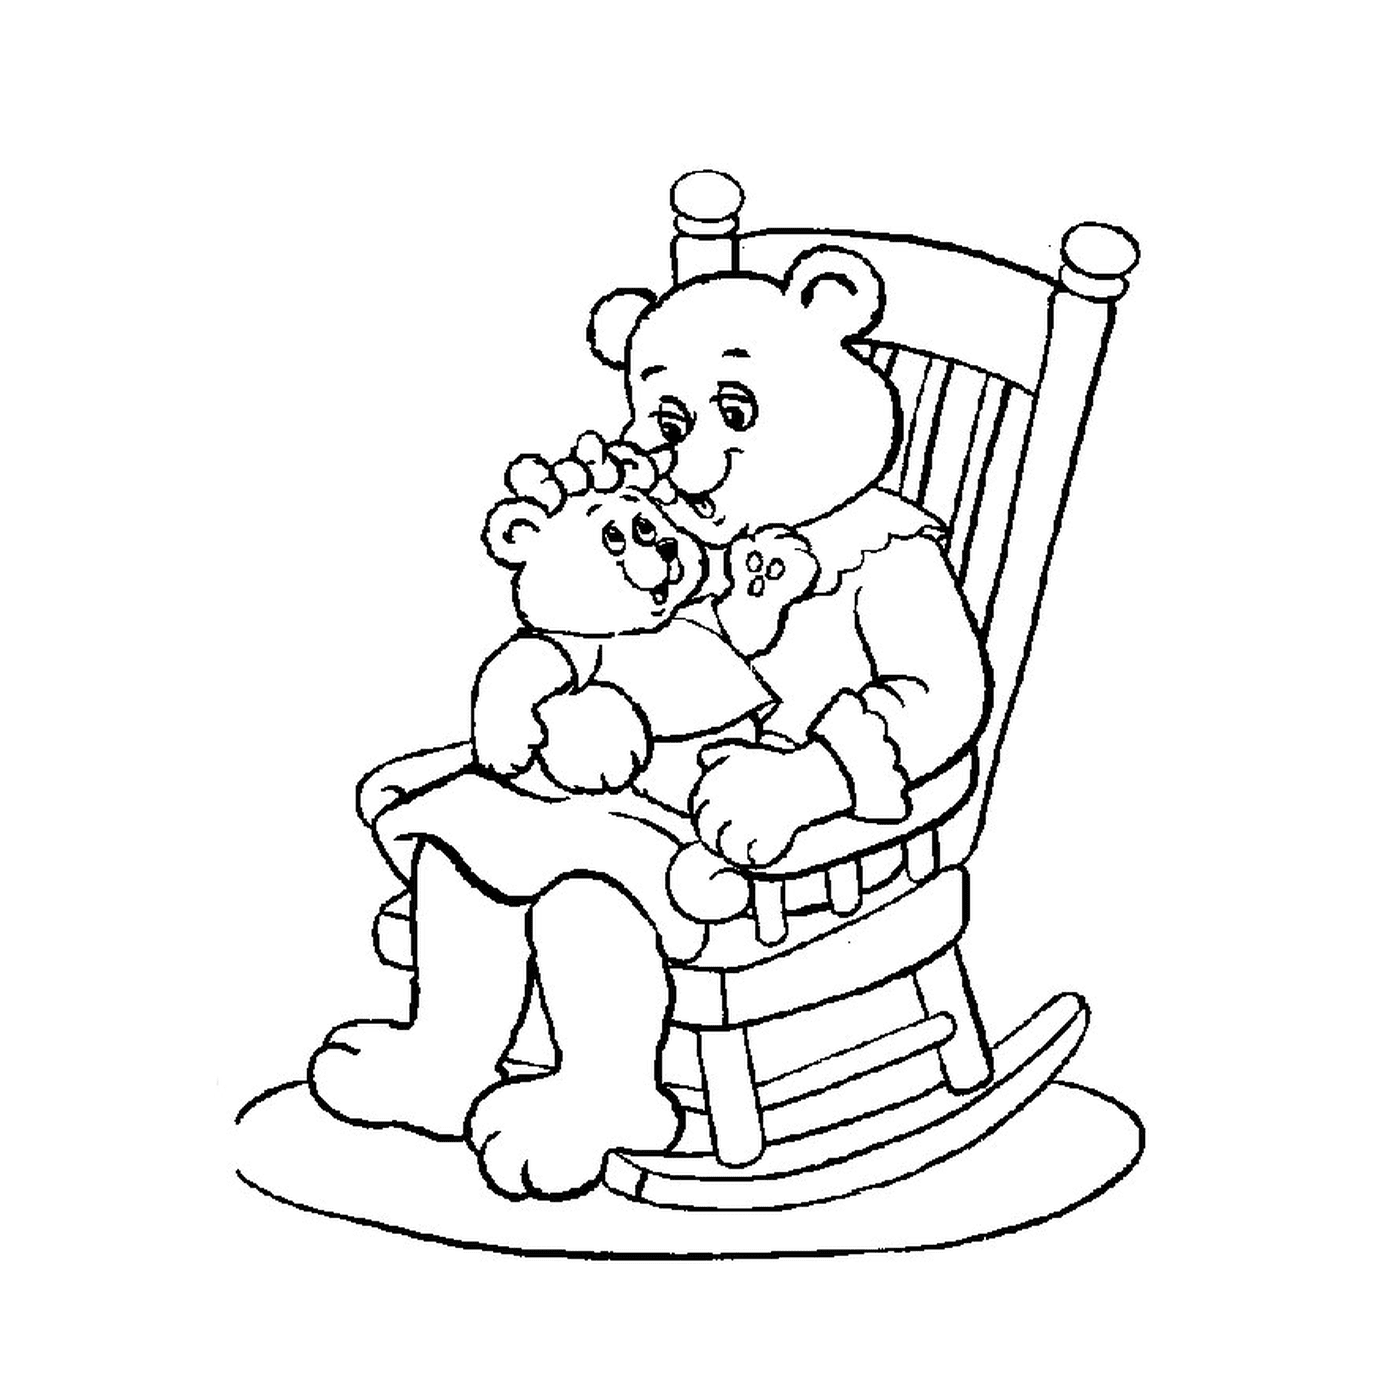  Bear sitting in a rocking chair holding a bear 